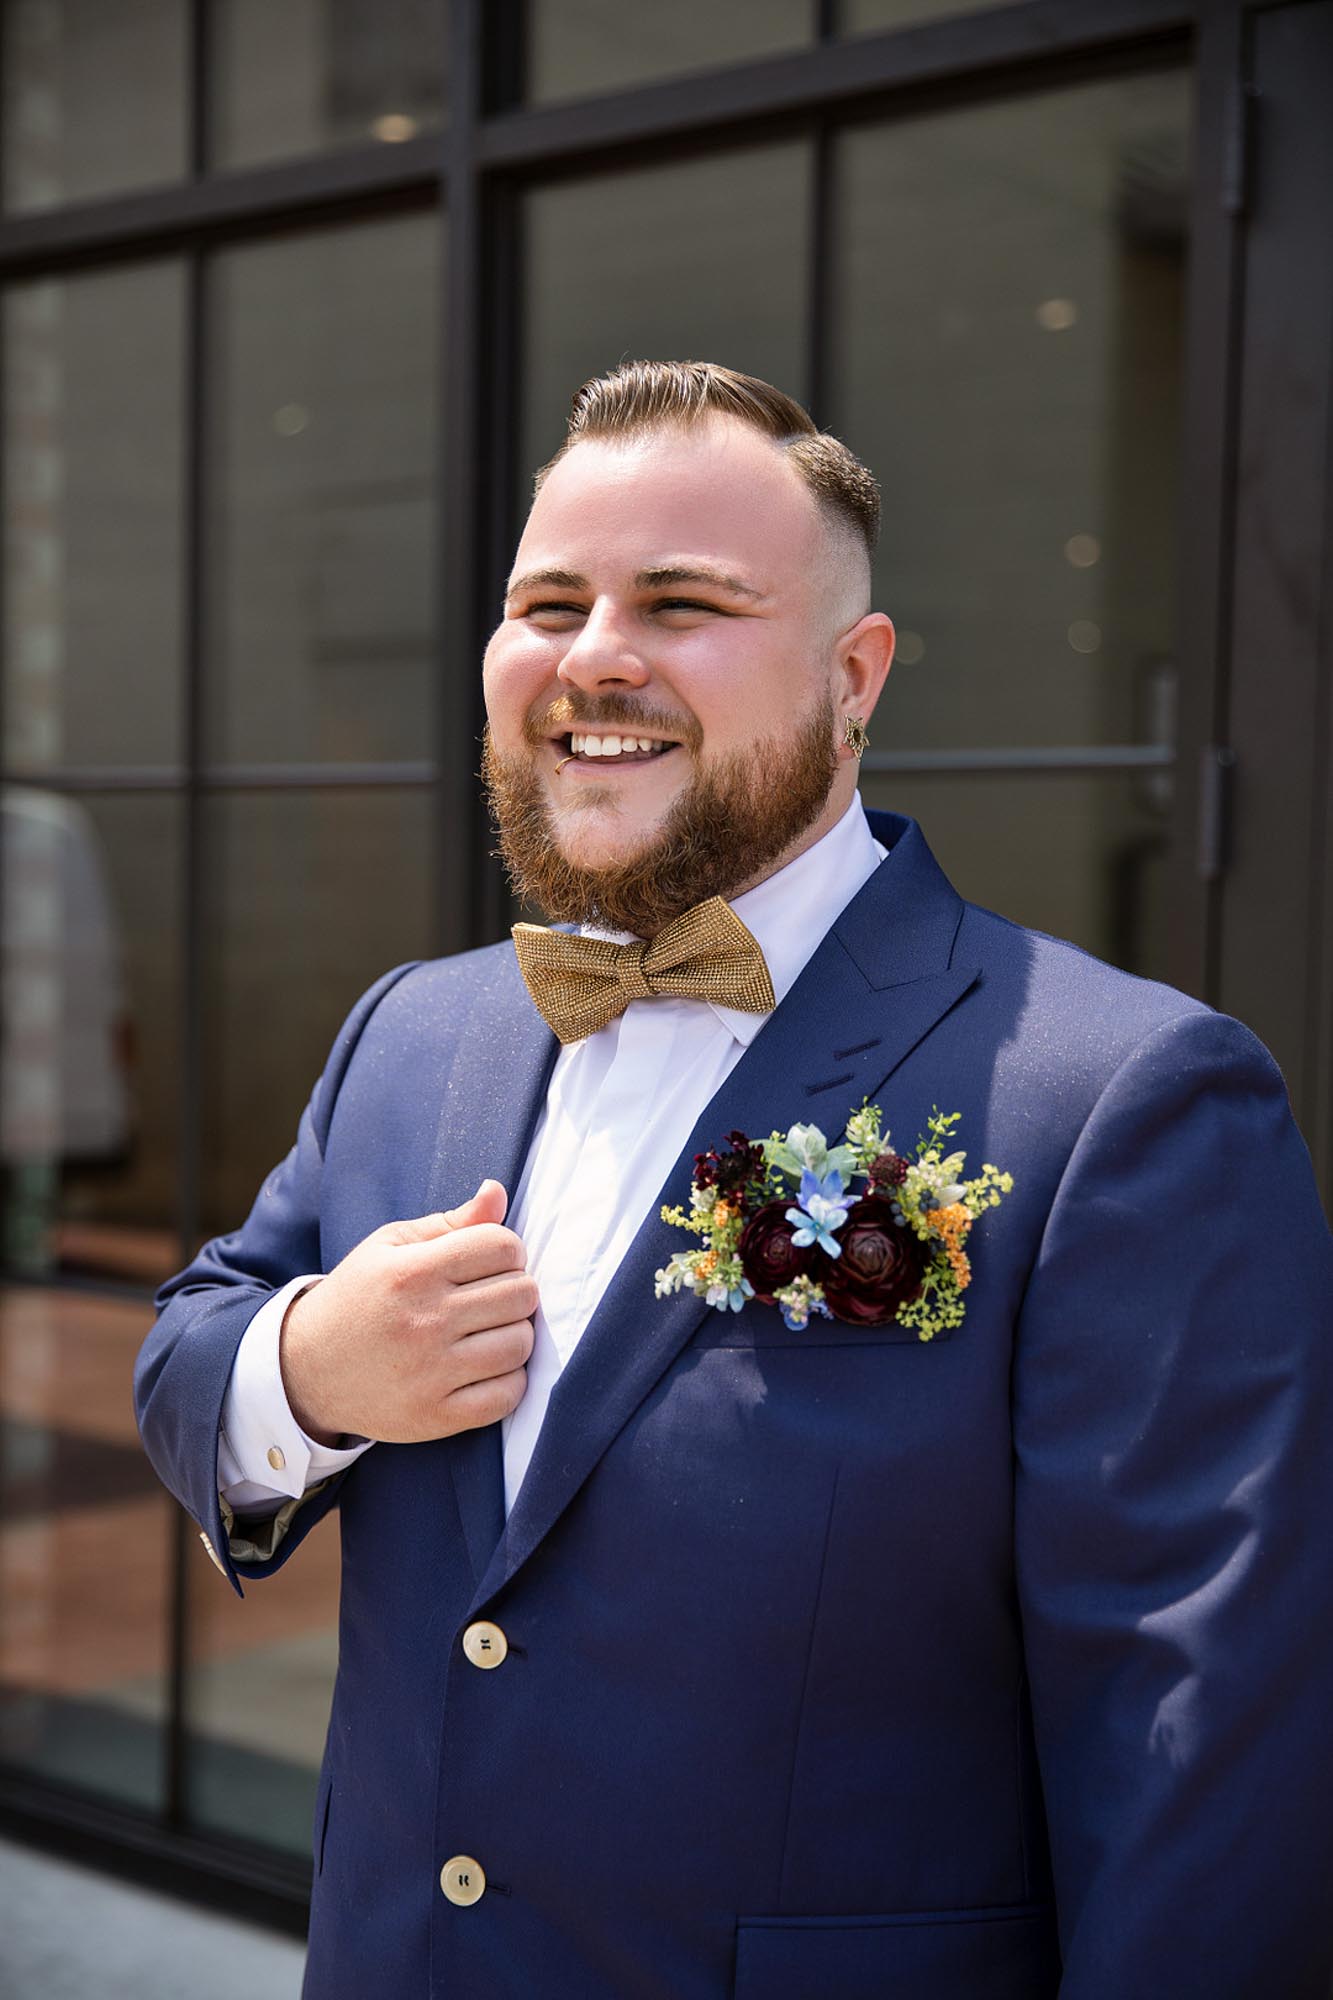 Celestial-themed Missouri wedding featuring navy and gold | Rae Marcel Photography and Lola Mango Photo & Film | Featured on Equally Wed, the leading LGBTQ+ wedding magazine